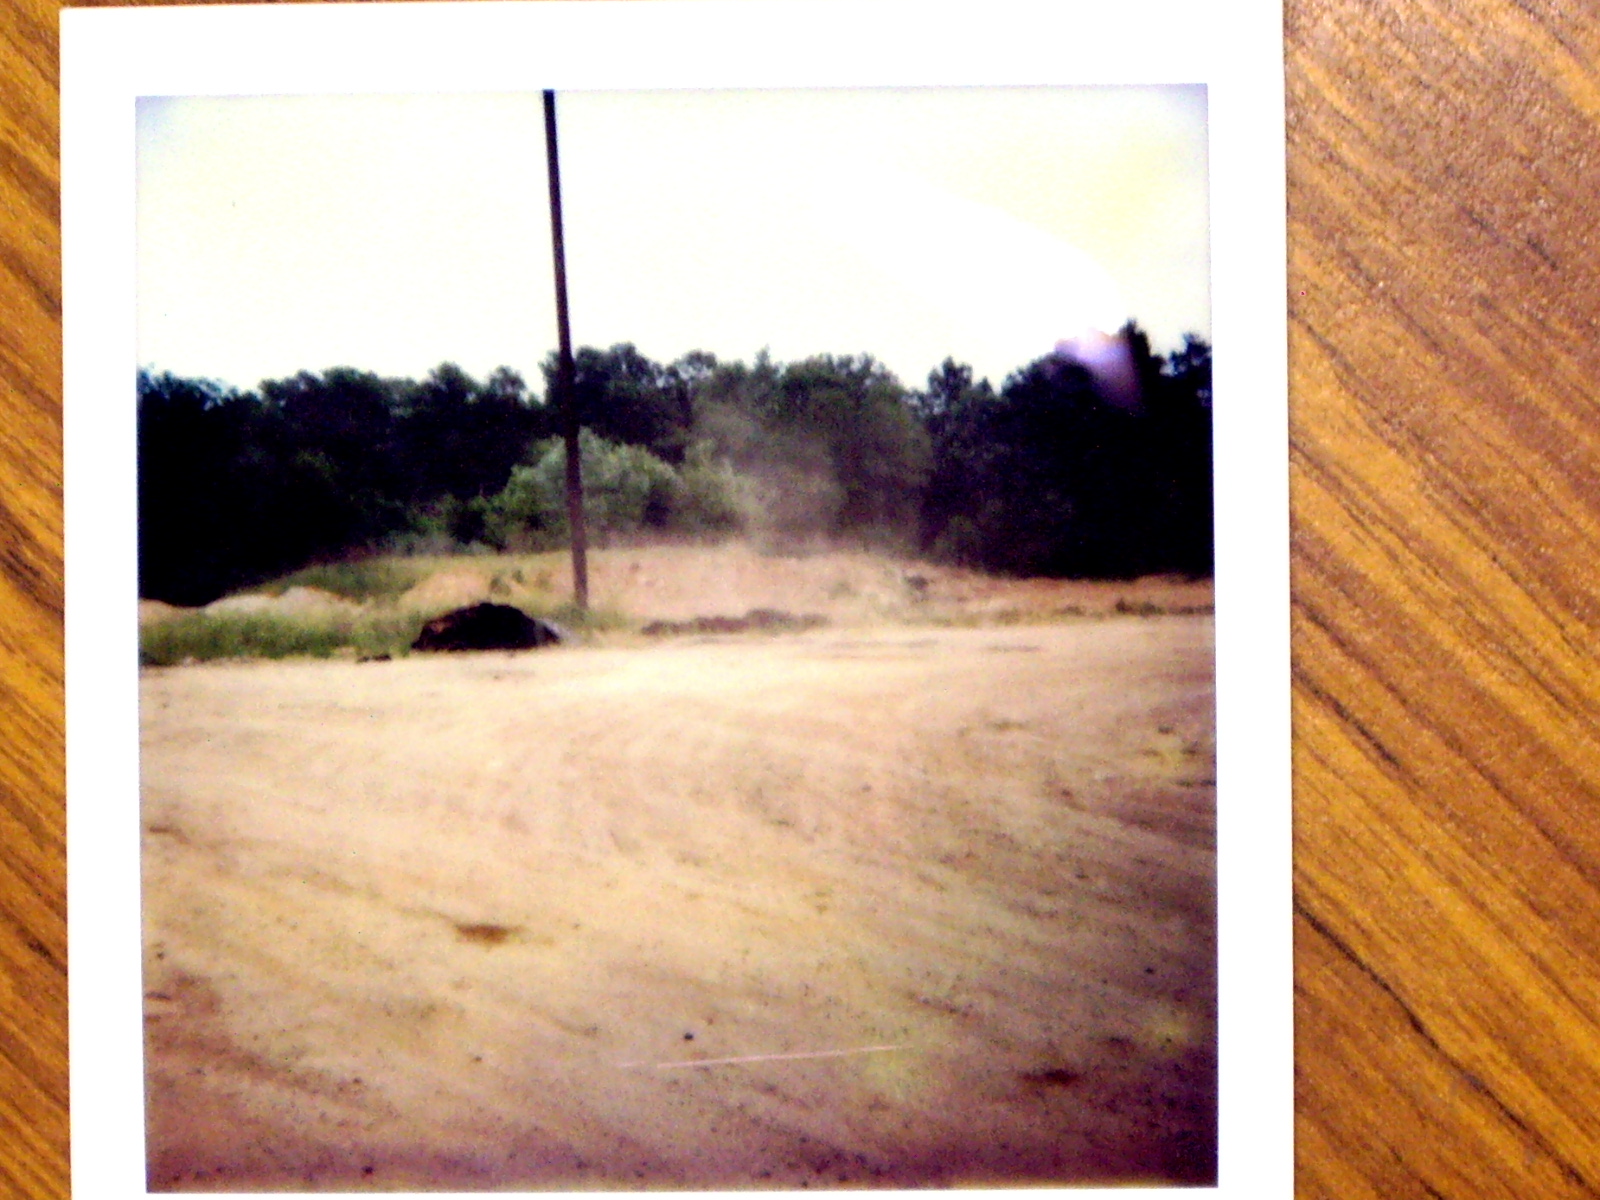 Image of vacant lot with dirt road